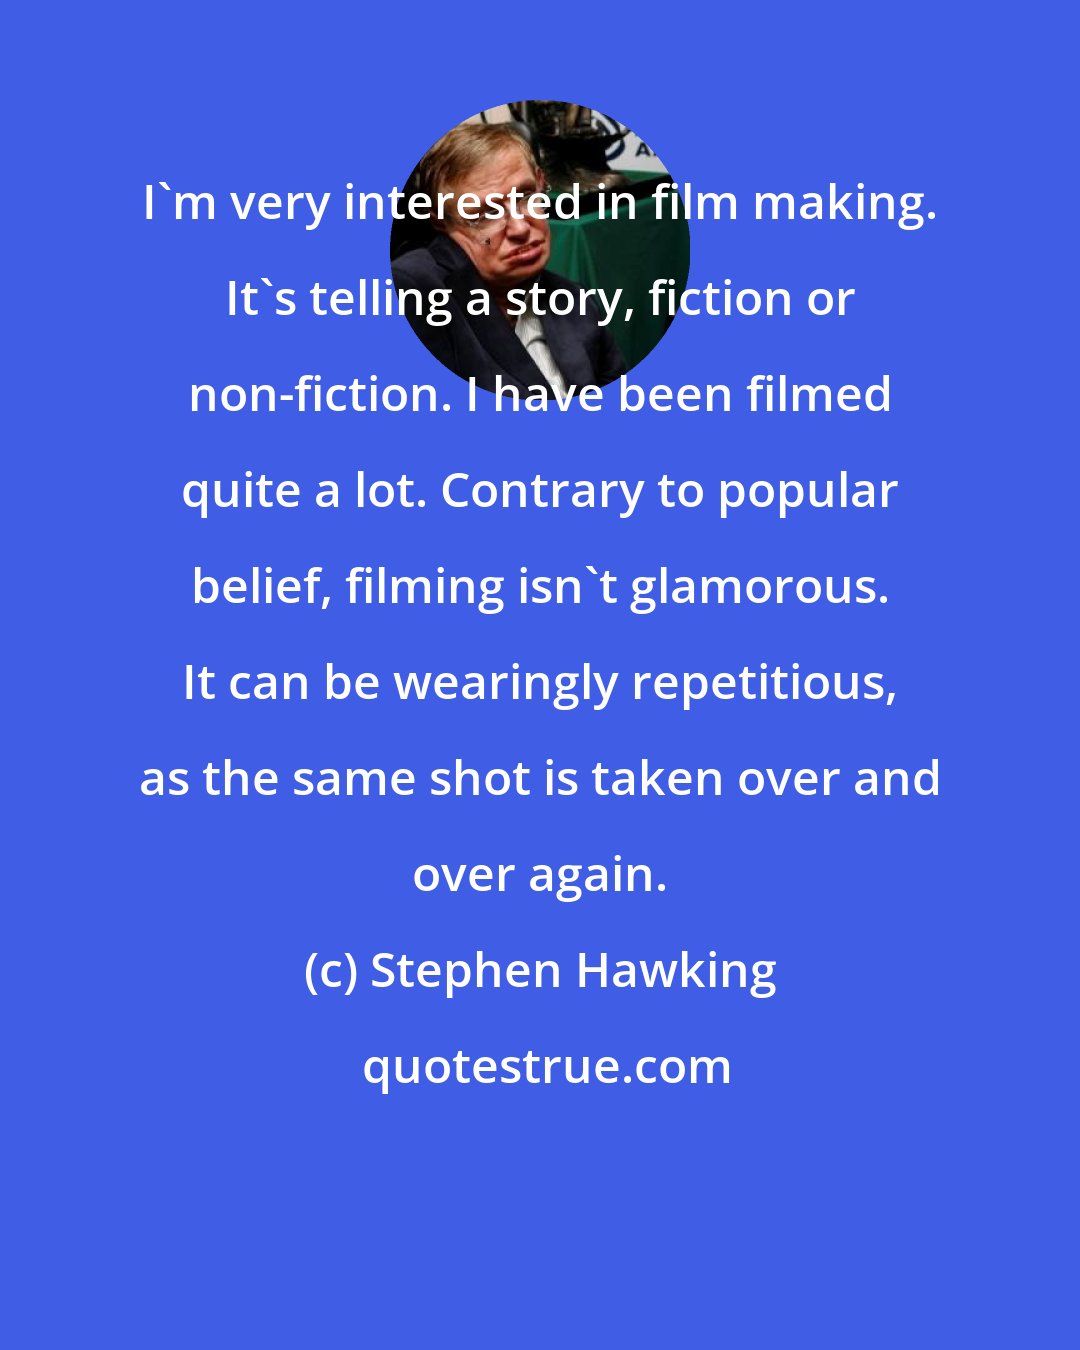 Stephen Hawking: I'm very interested in film making. It's telling a story, fiction or non-fiction. I have been filmed quite a lot. Contrary to popular belief, filming isn't glamorous. It can be wearingly repetitious, as the same shot is taken over and over again.